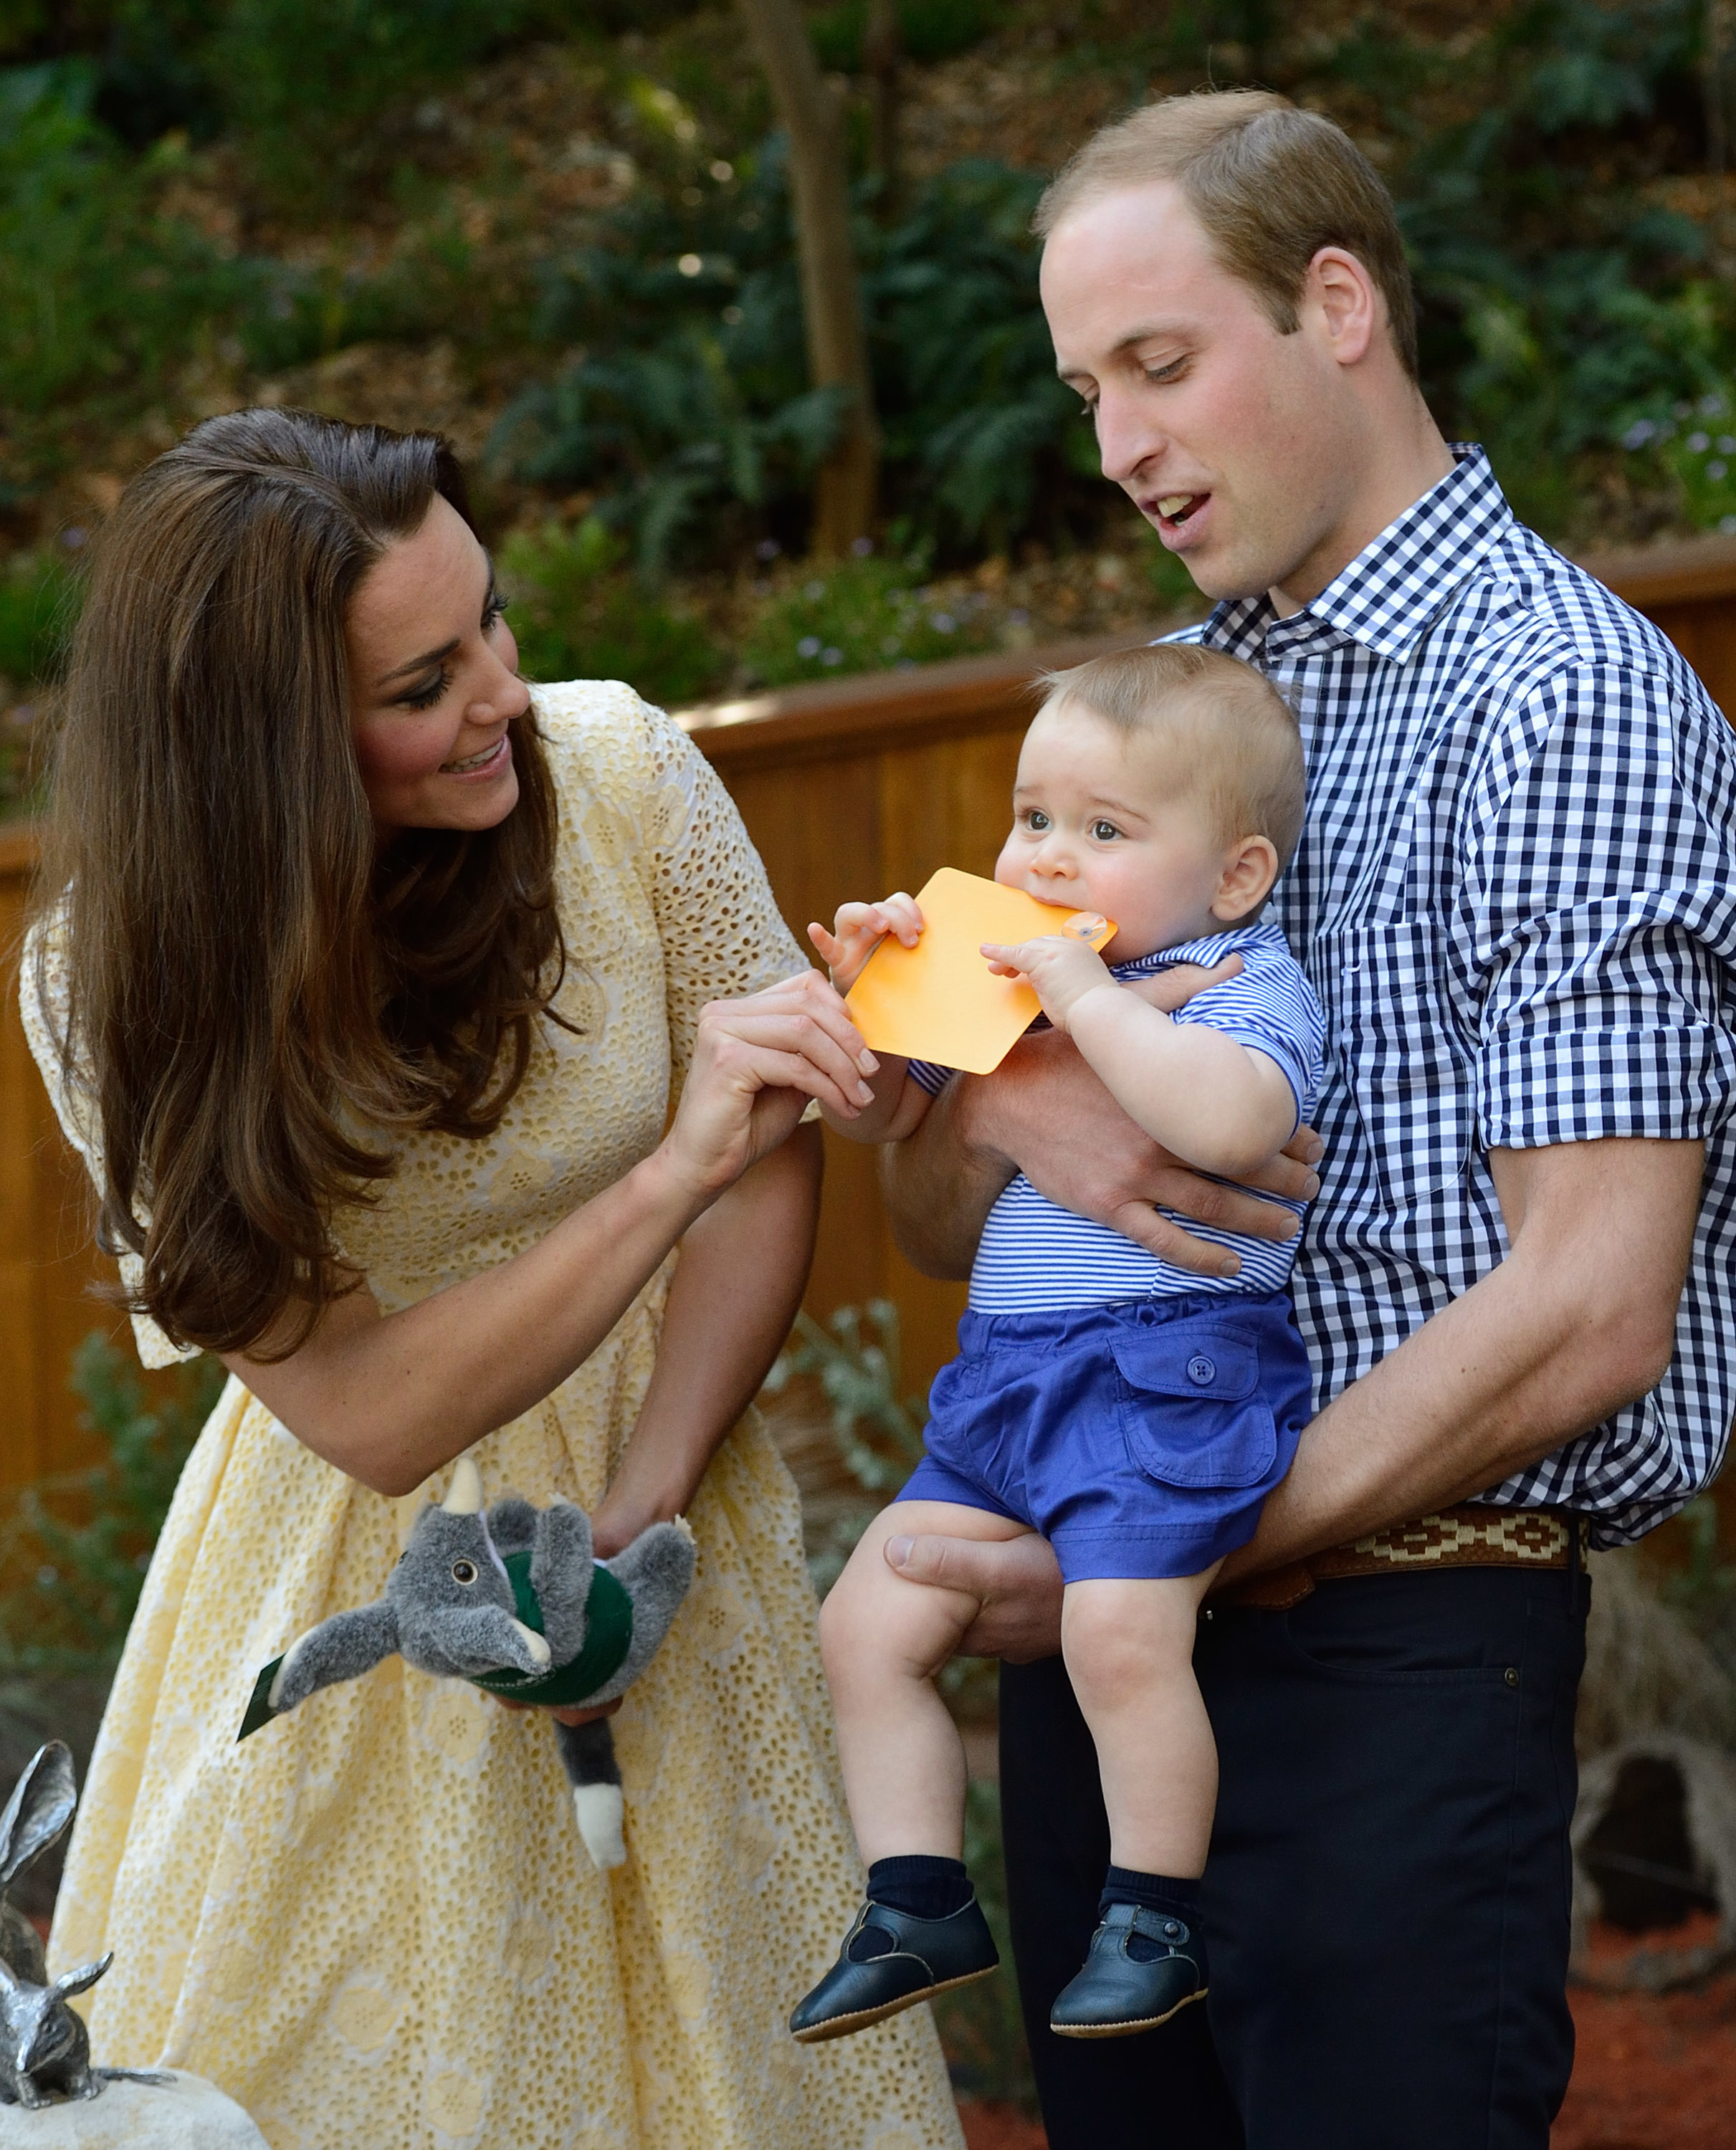 <p><a href="https://www.wonderwall.com/celebrity/profiles/overview/prince-william-482.article">Prince William</a>, <a href="https://www.wonderwall.com/celebrity/profiles/overview/duchess-kate-1356.article">Duchess Kate</a> and Prince George shared an adorable moment while visiting the Taronga Zoo in Sydney on April 20, 2014, during their tour of Australia.</p>